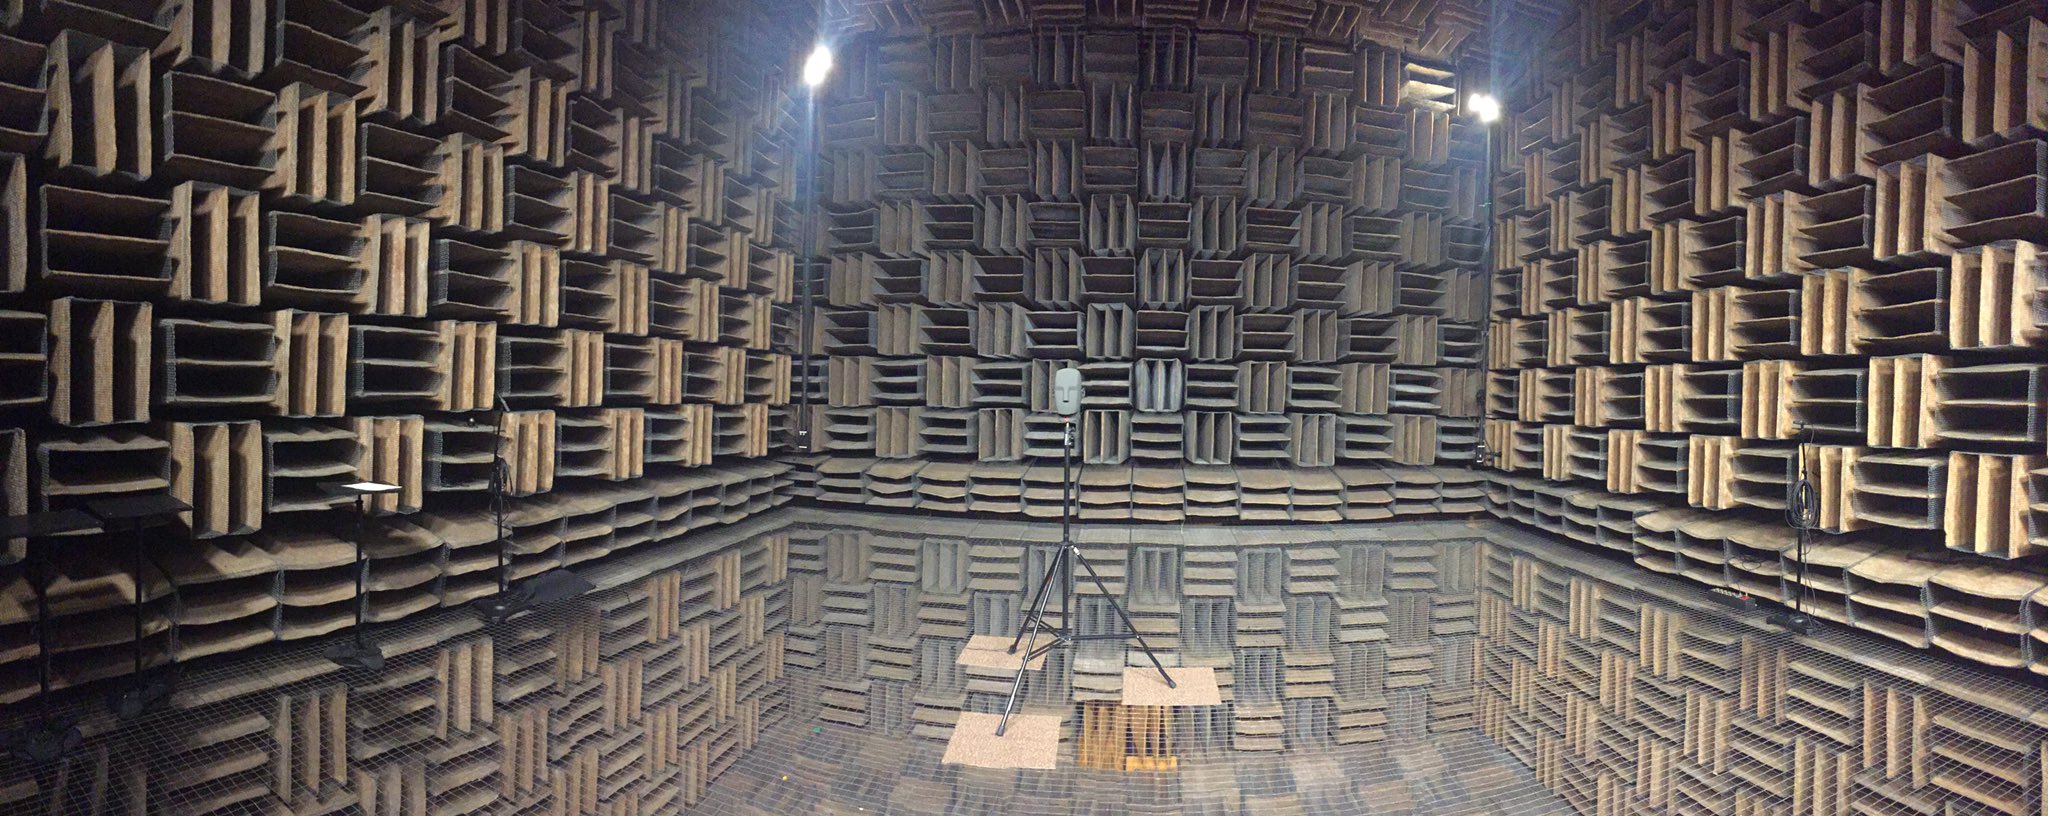 Image of an anechoic chamber.